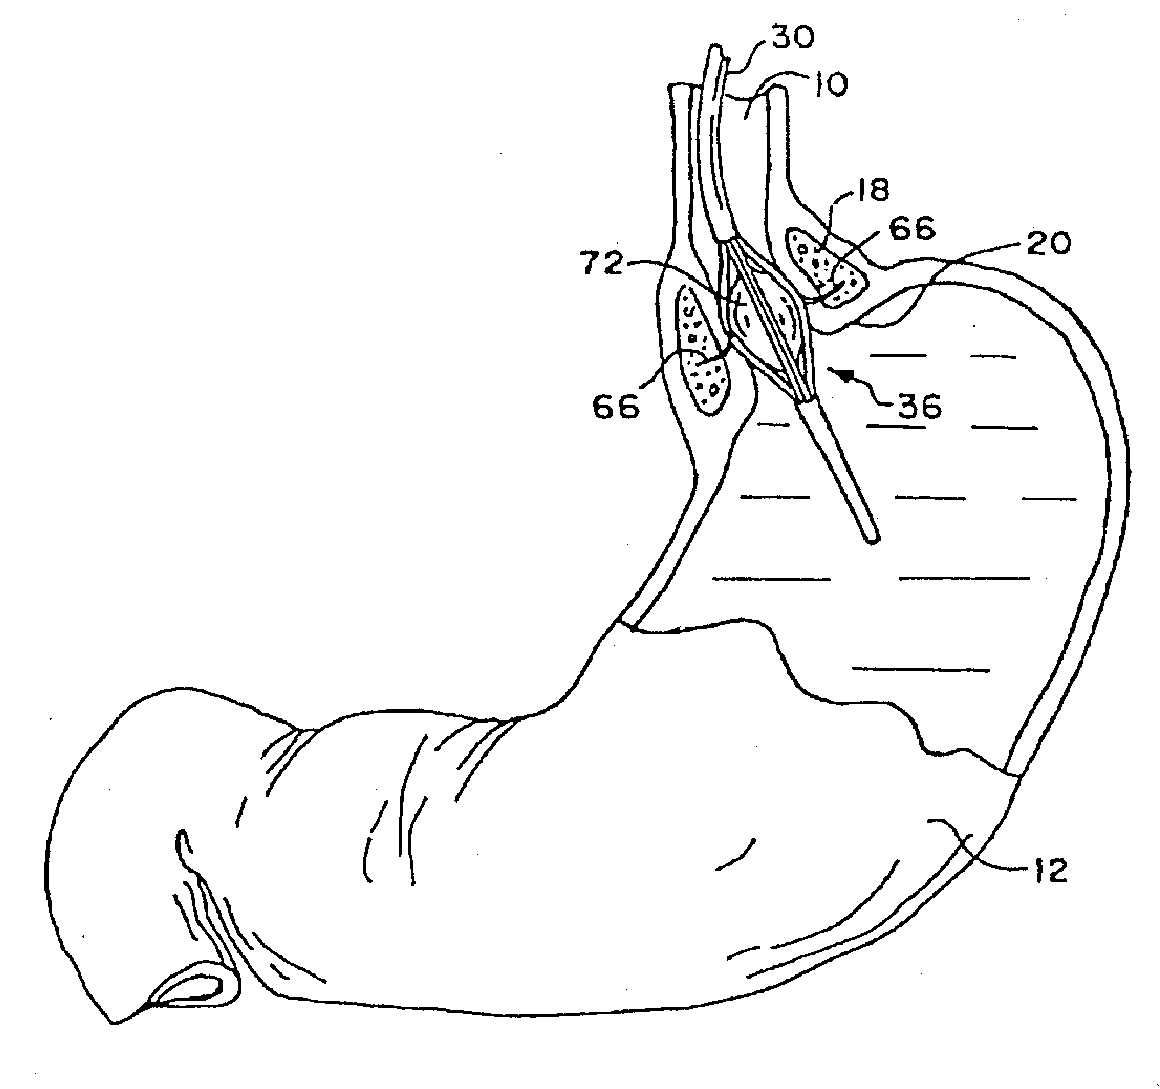 Method for Vacuum-Assisted Tissue Ablation